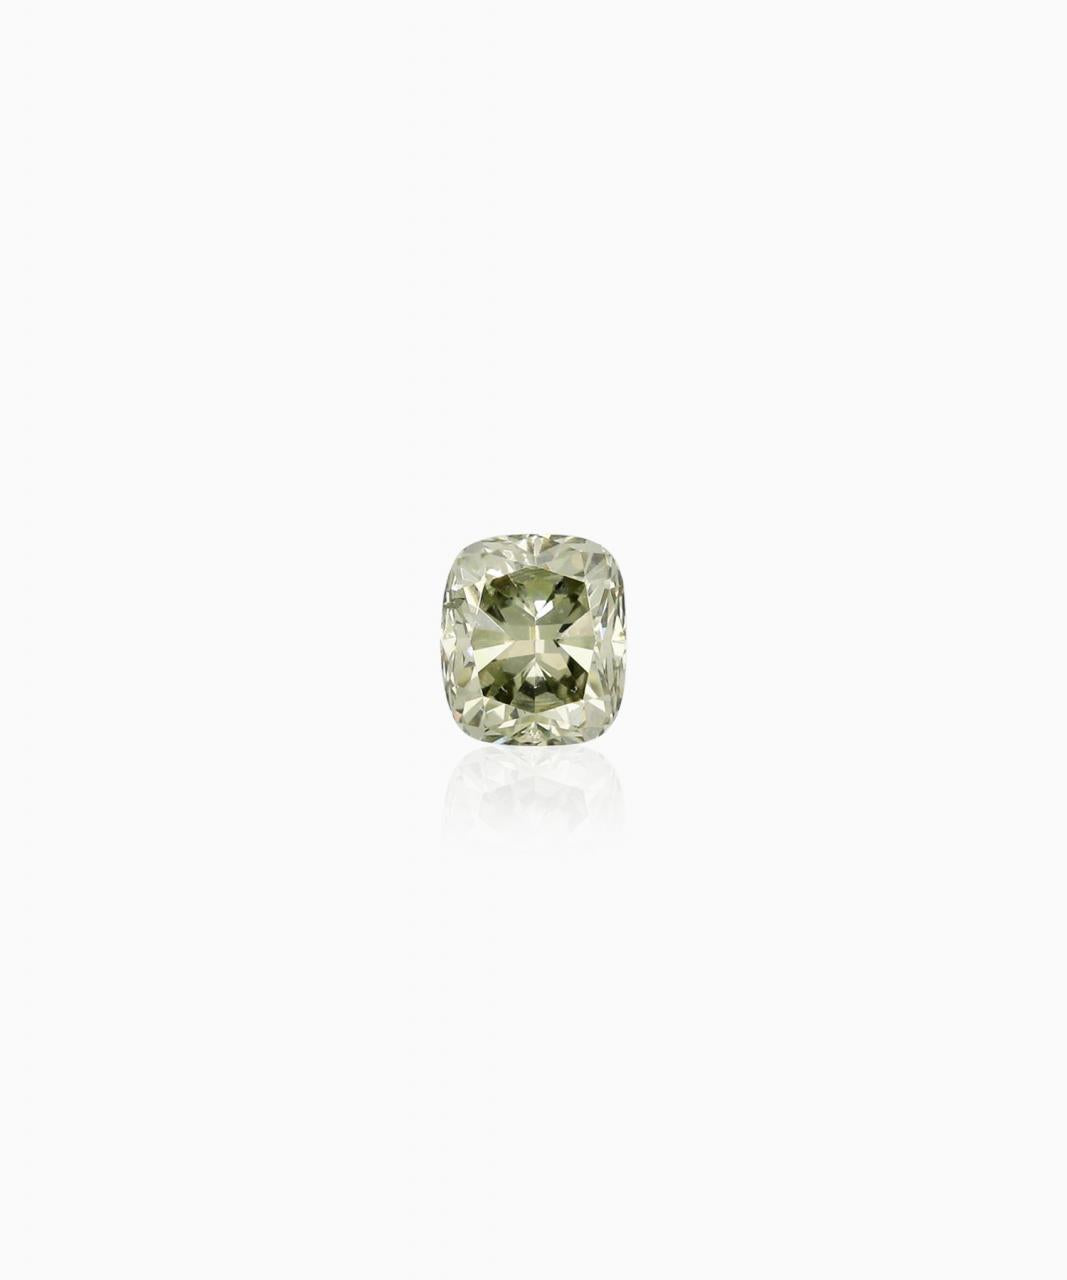 0.14ct Natural Fancy Green/Olive, SI1